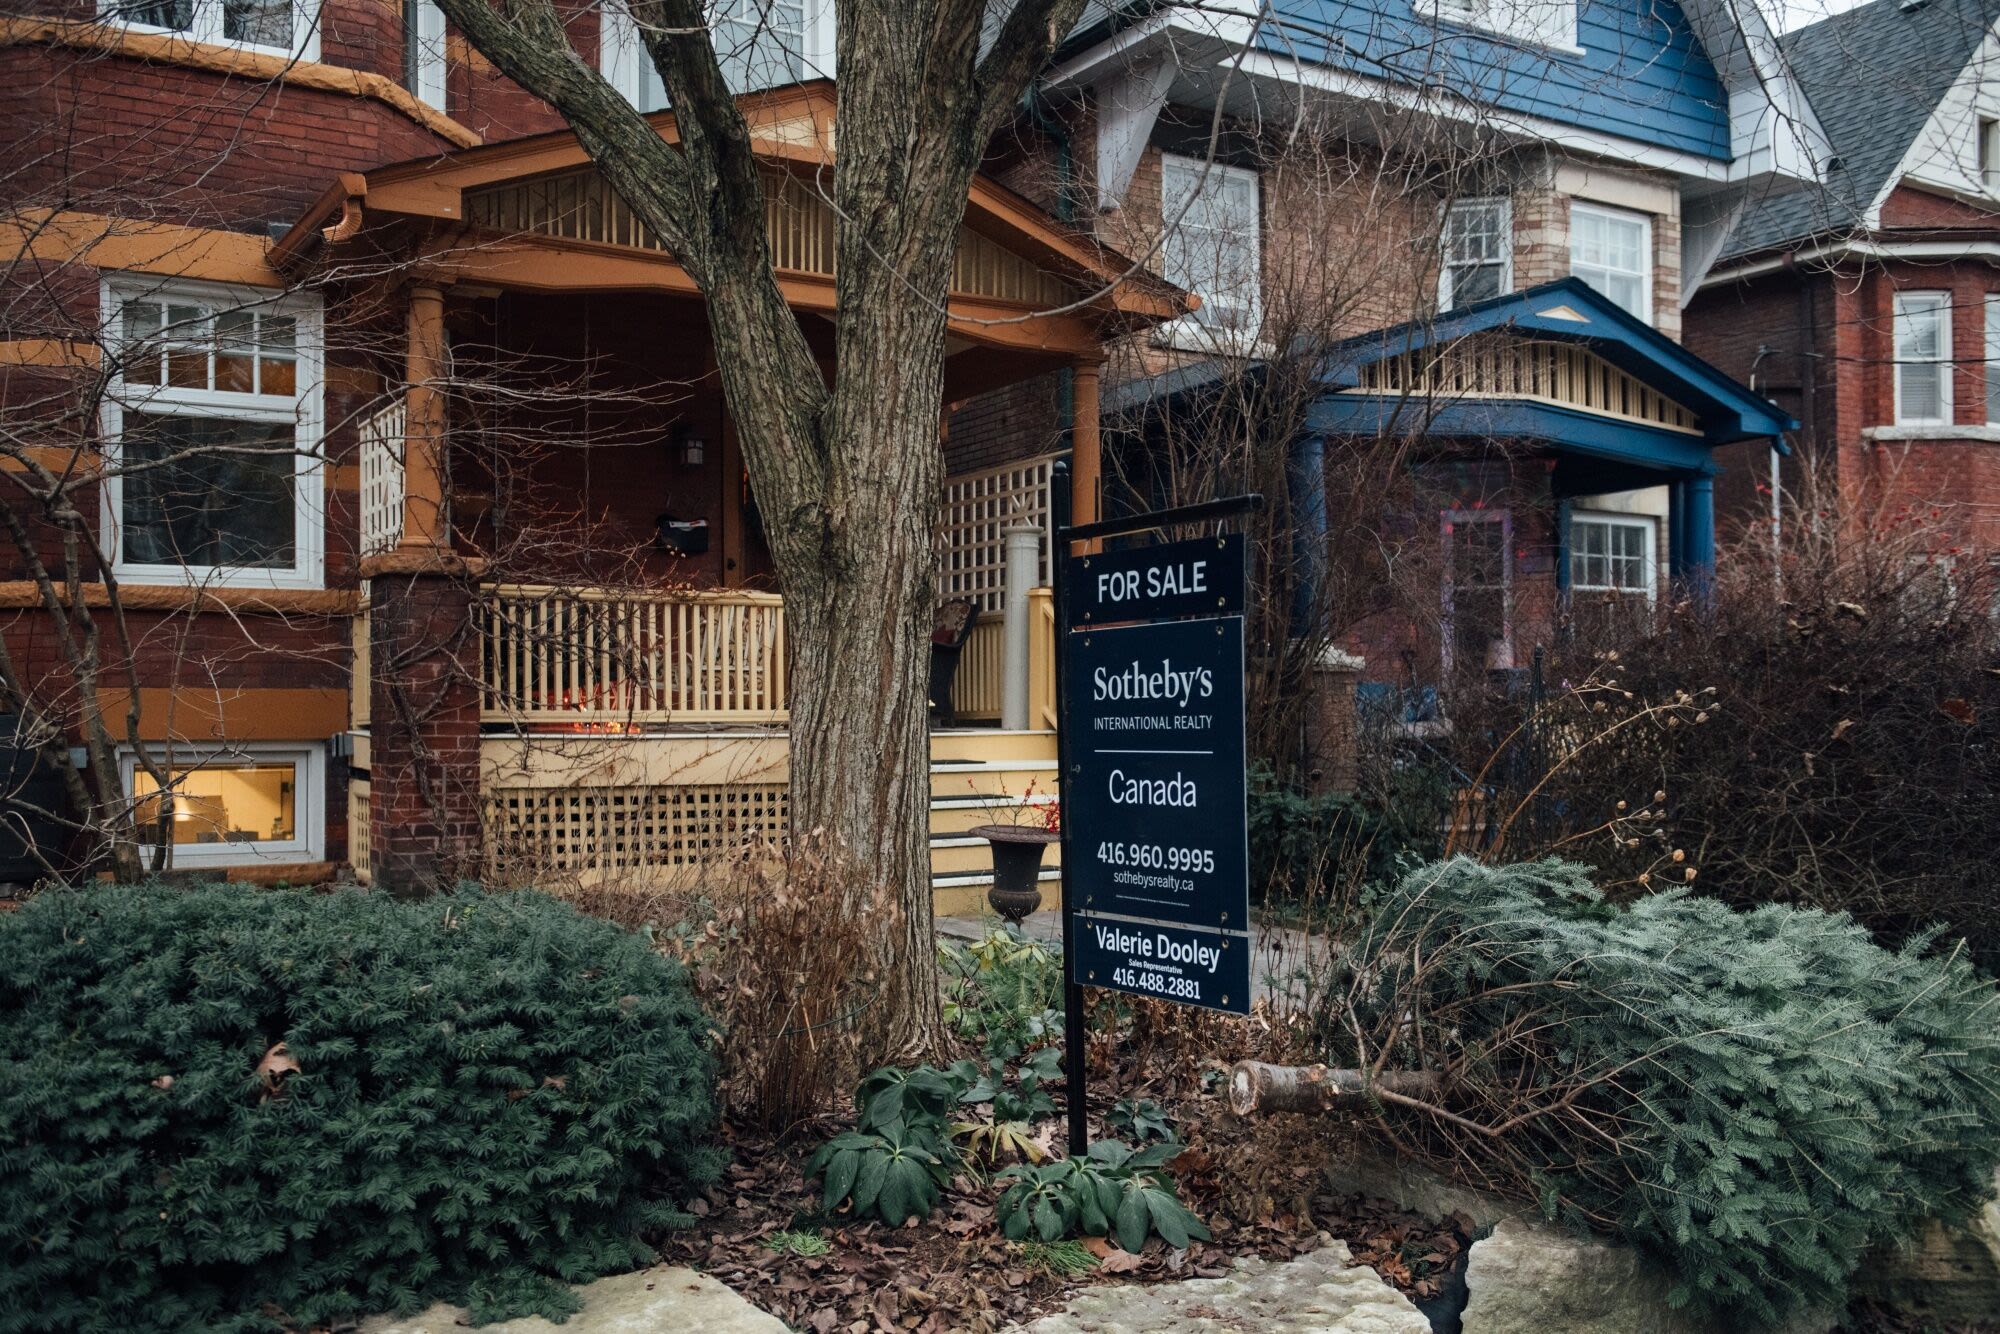 Toronto Home Prices Drop as Listings Linger on the Market